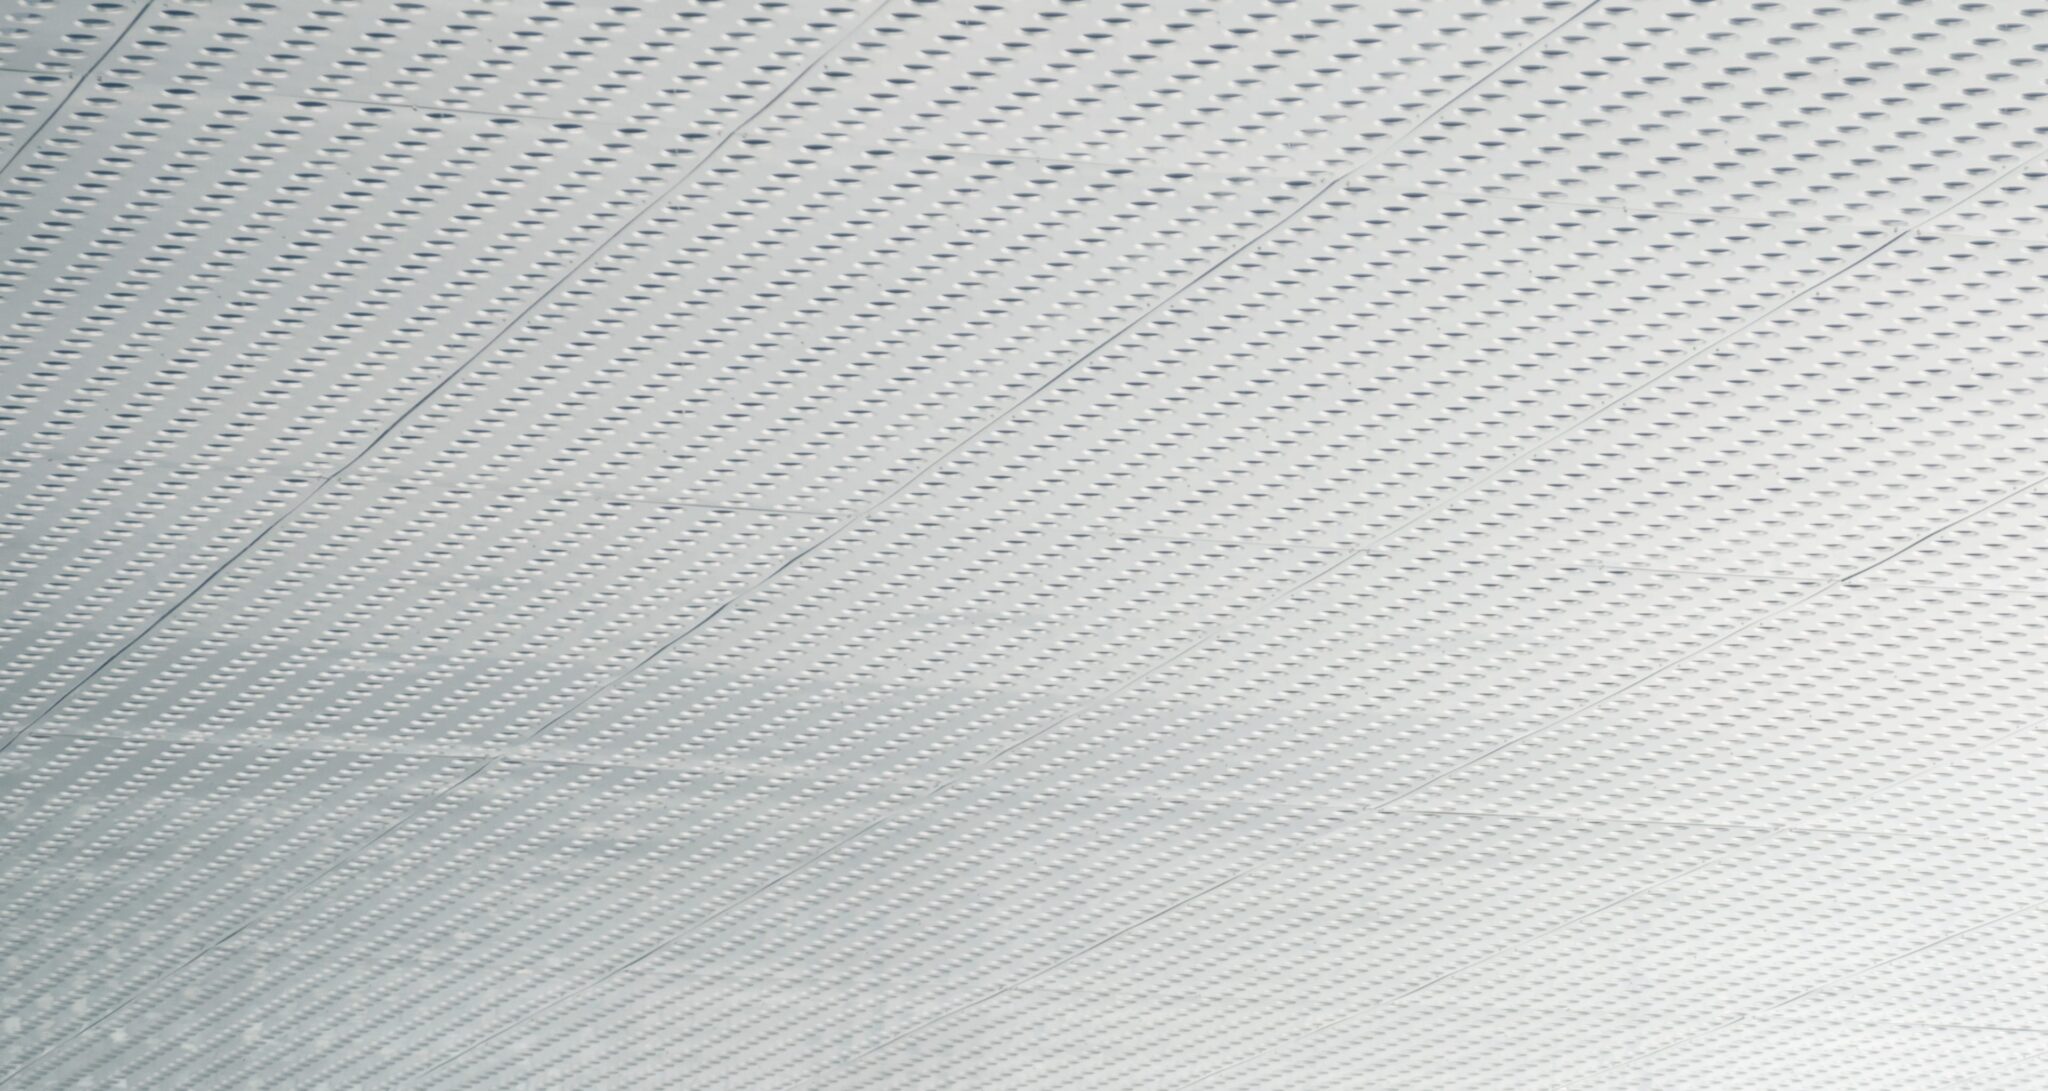 Ceiling of white panels with a pimple dotted effect